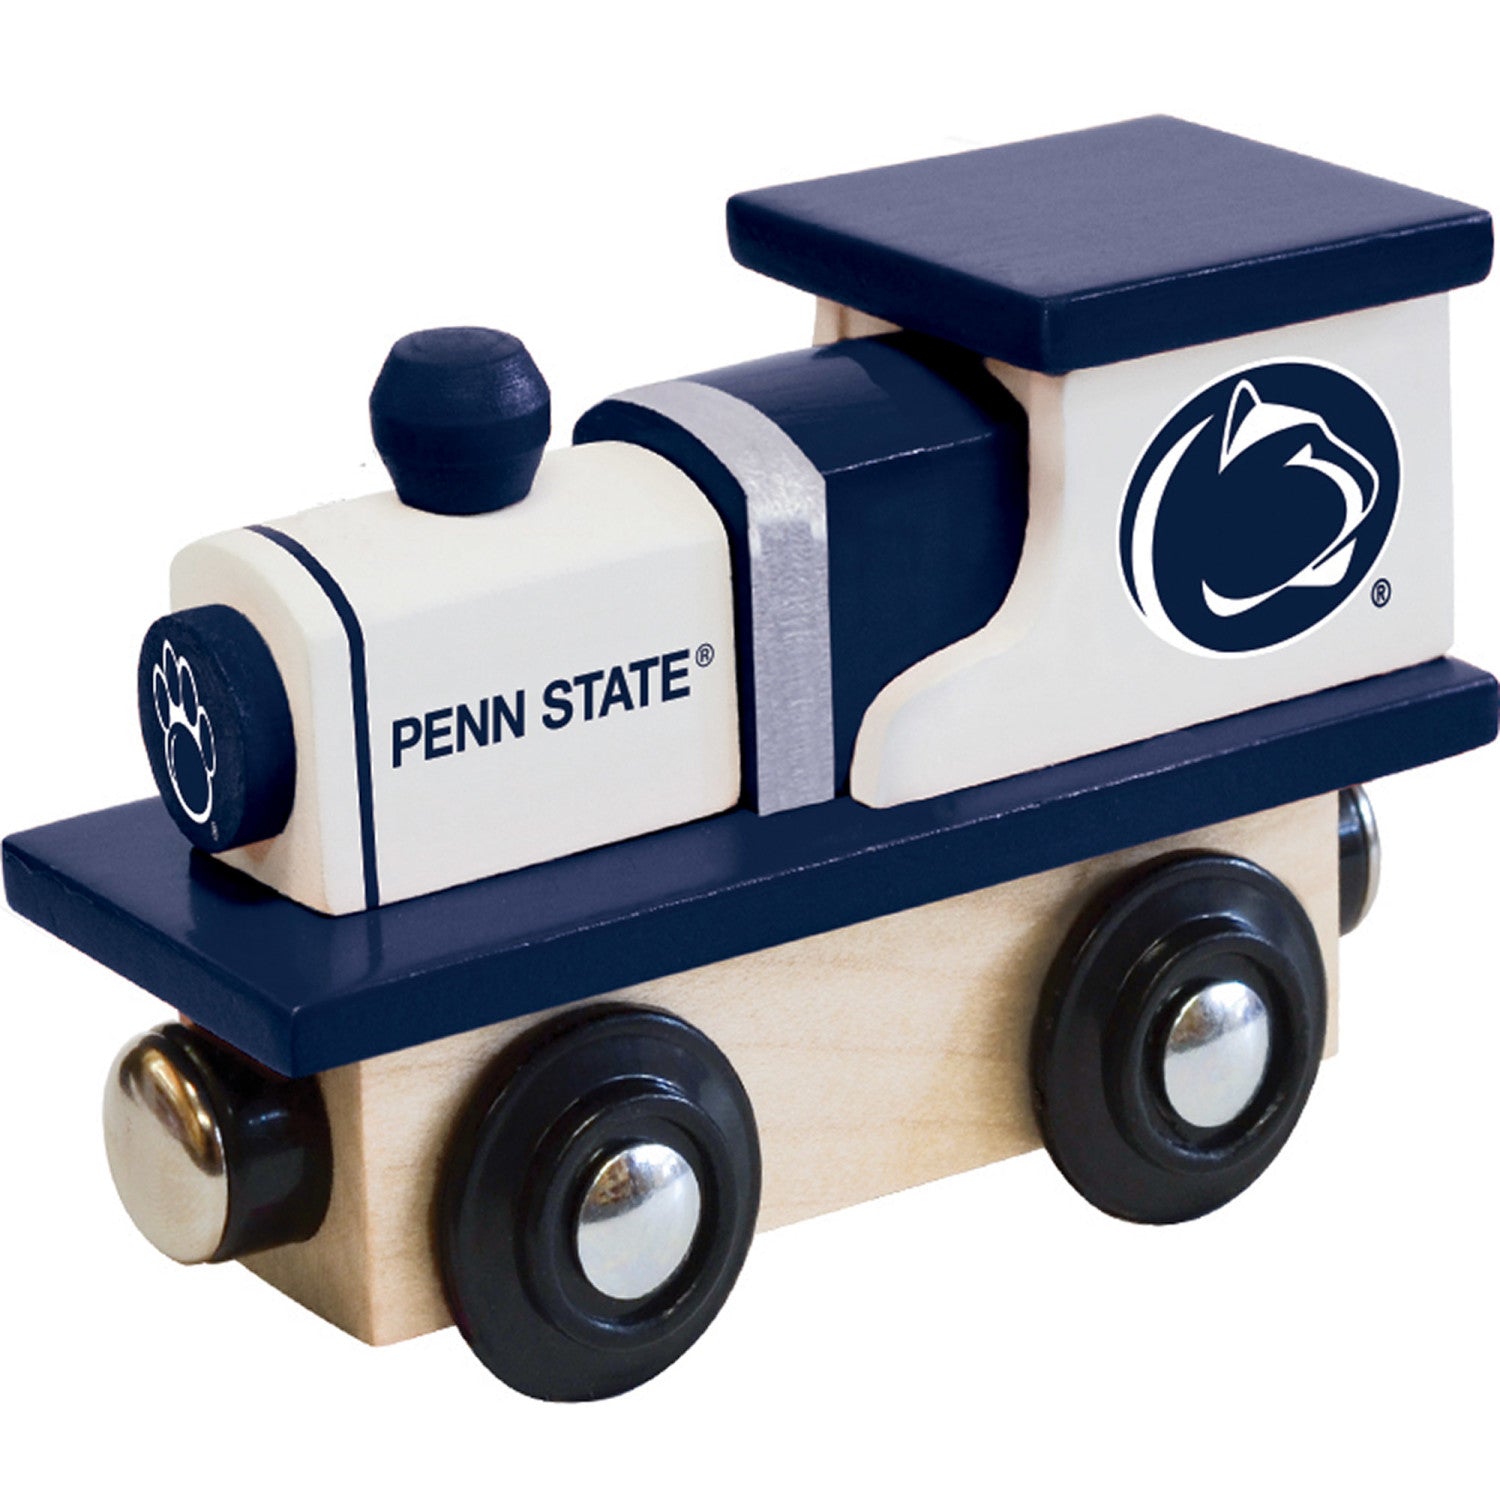 Penn State Nittany Lions Toy Train Engine